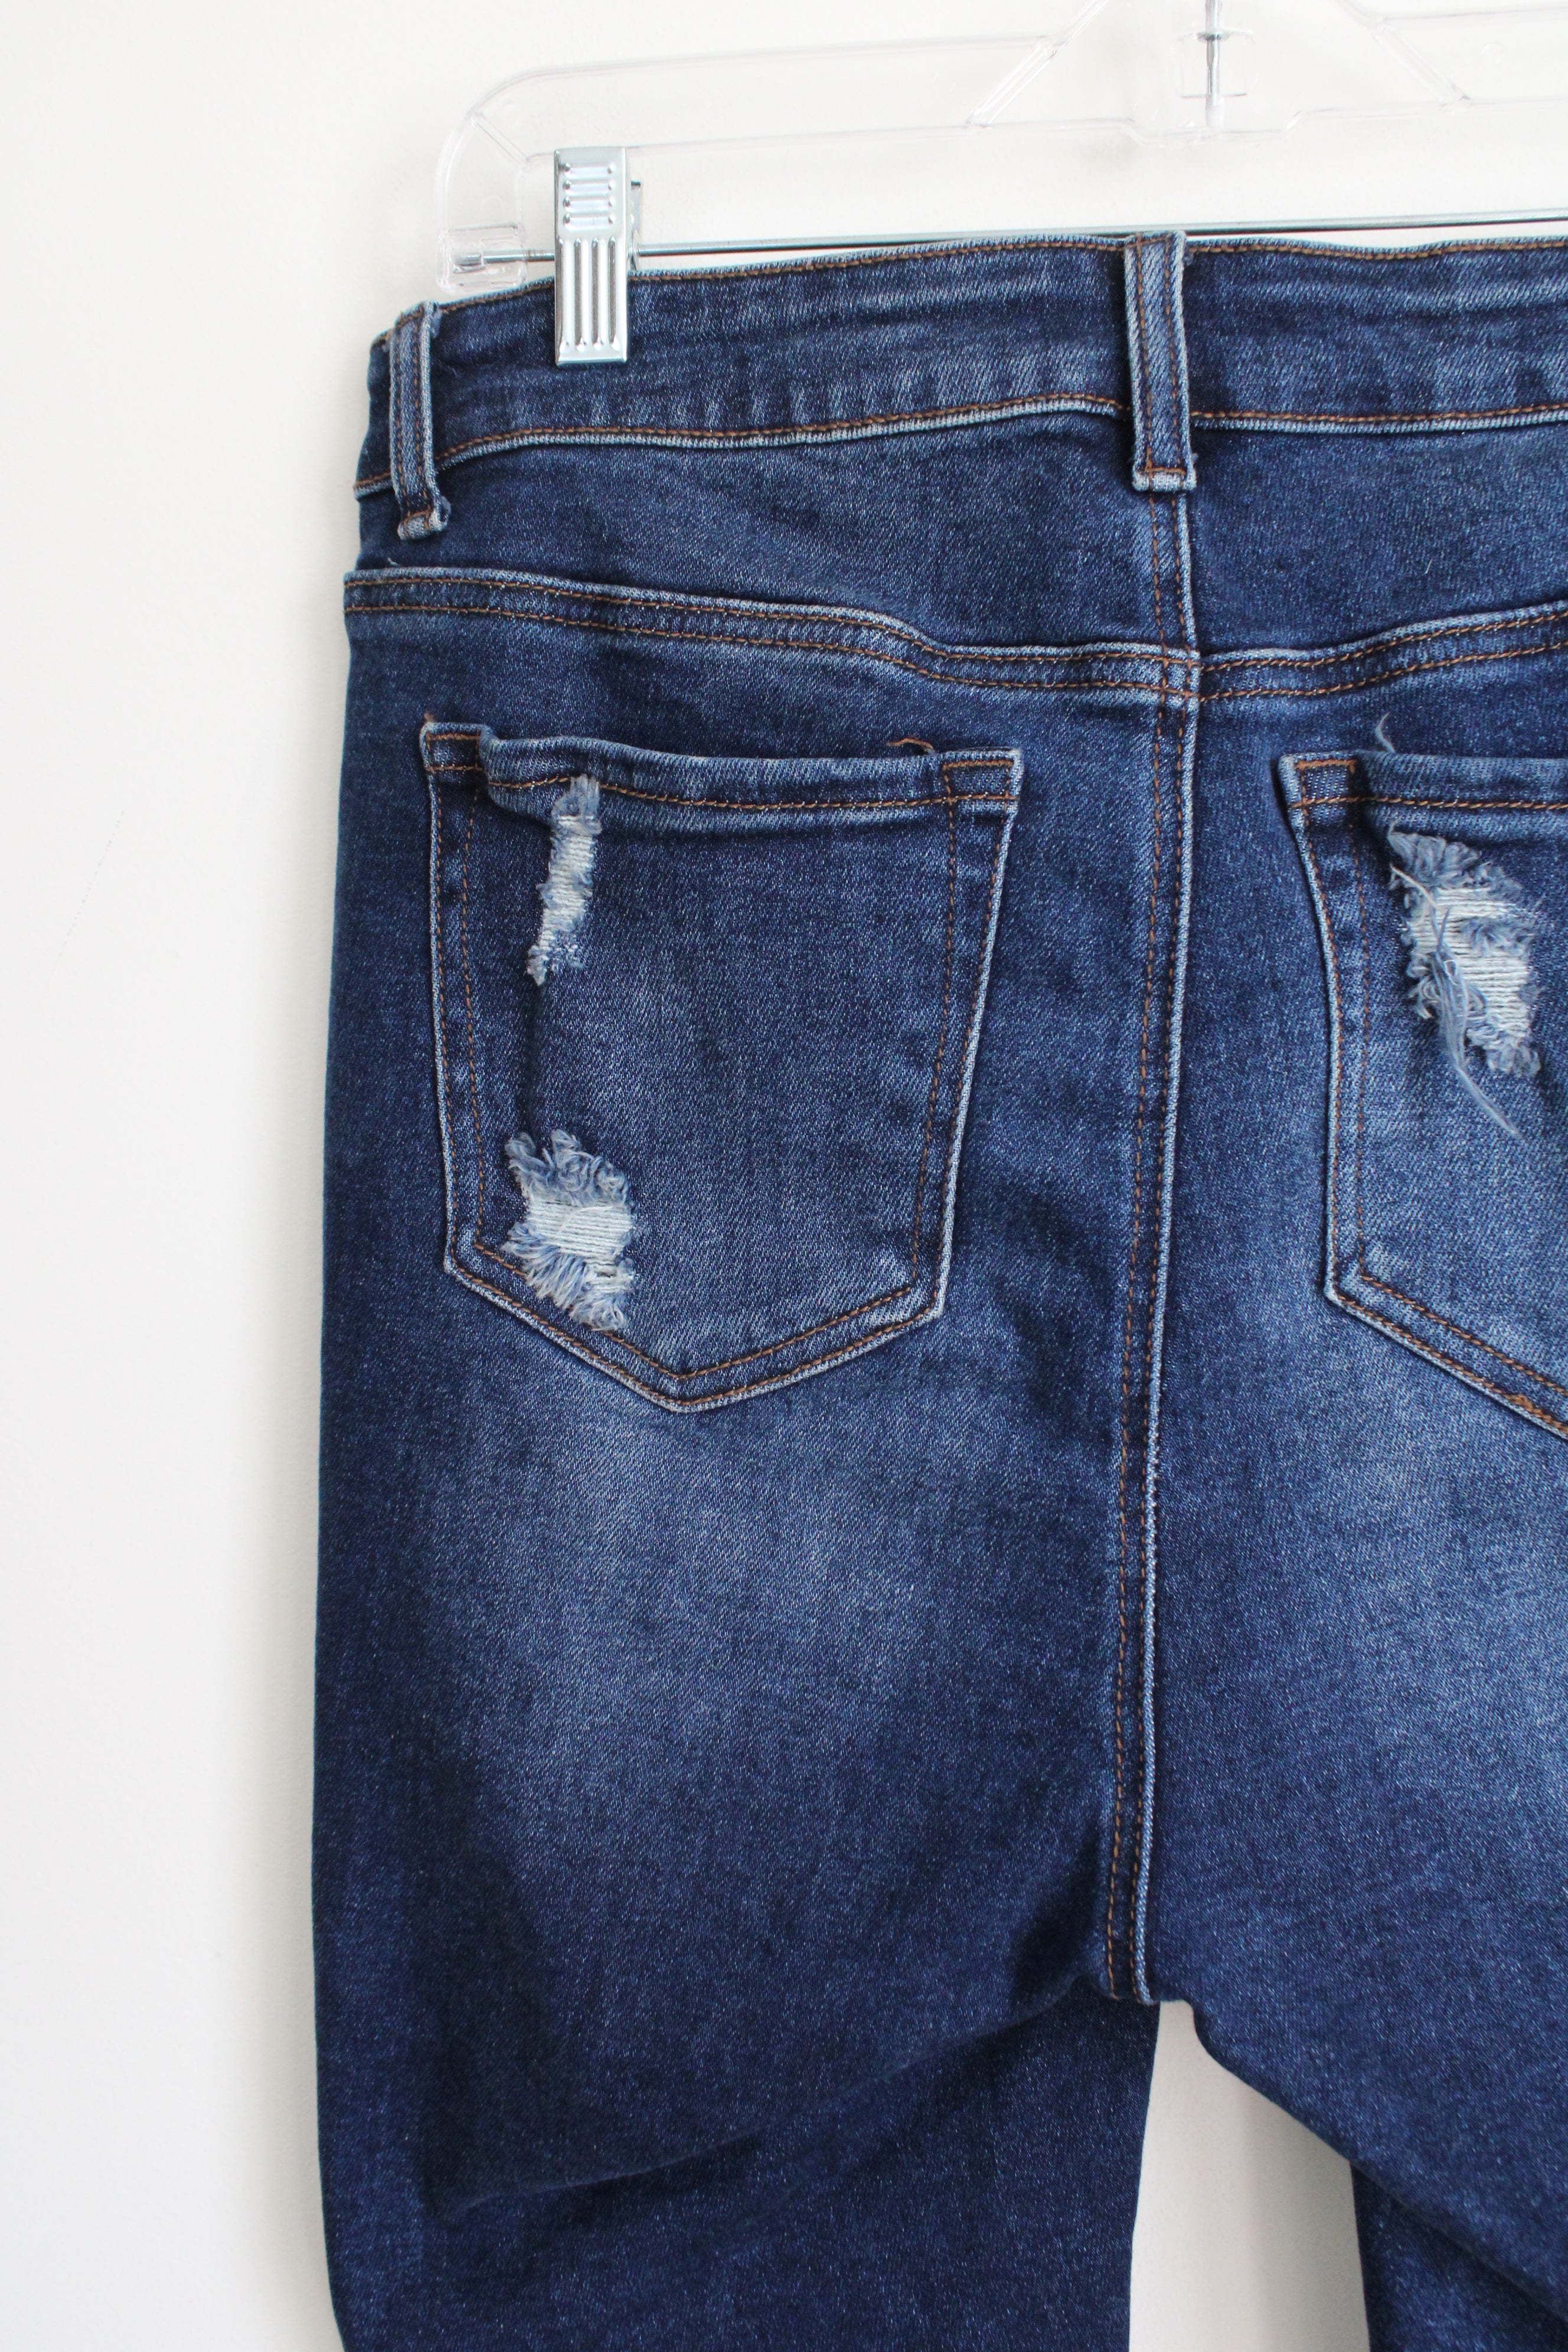 Wax Jean Collection Distressed Long Shorts | 1X